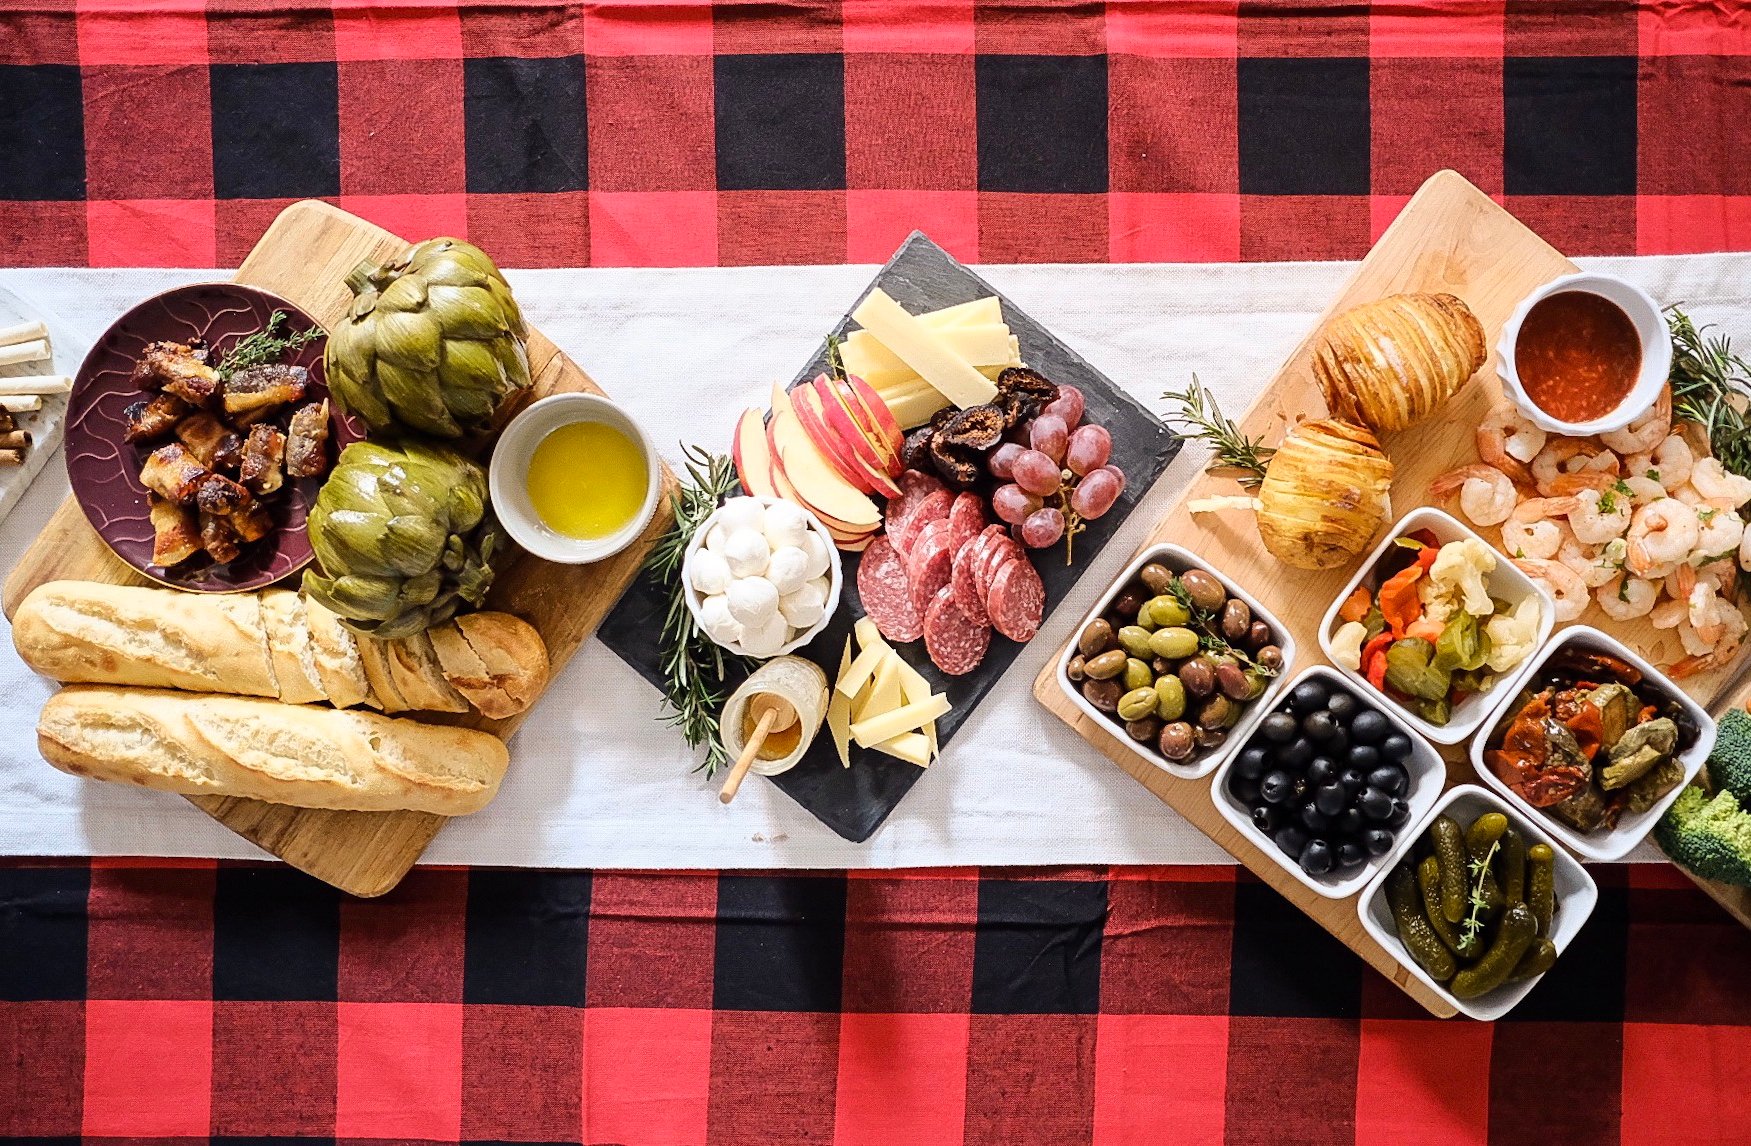 Chocolate and Lace shares her tips on how to build the best Charcuterie Board. 